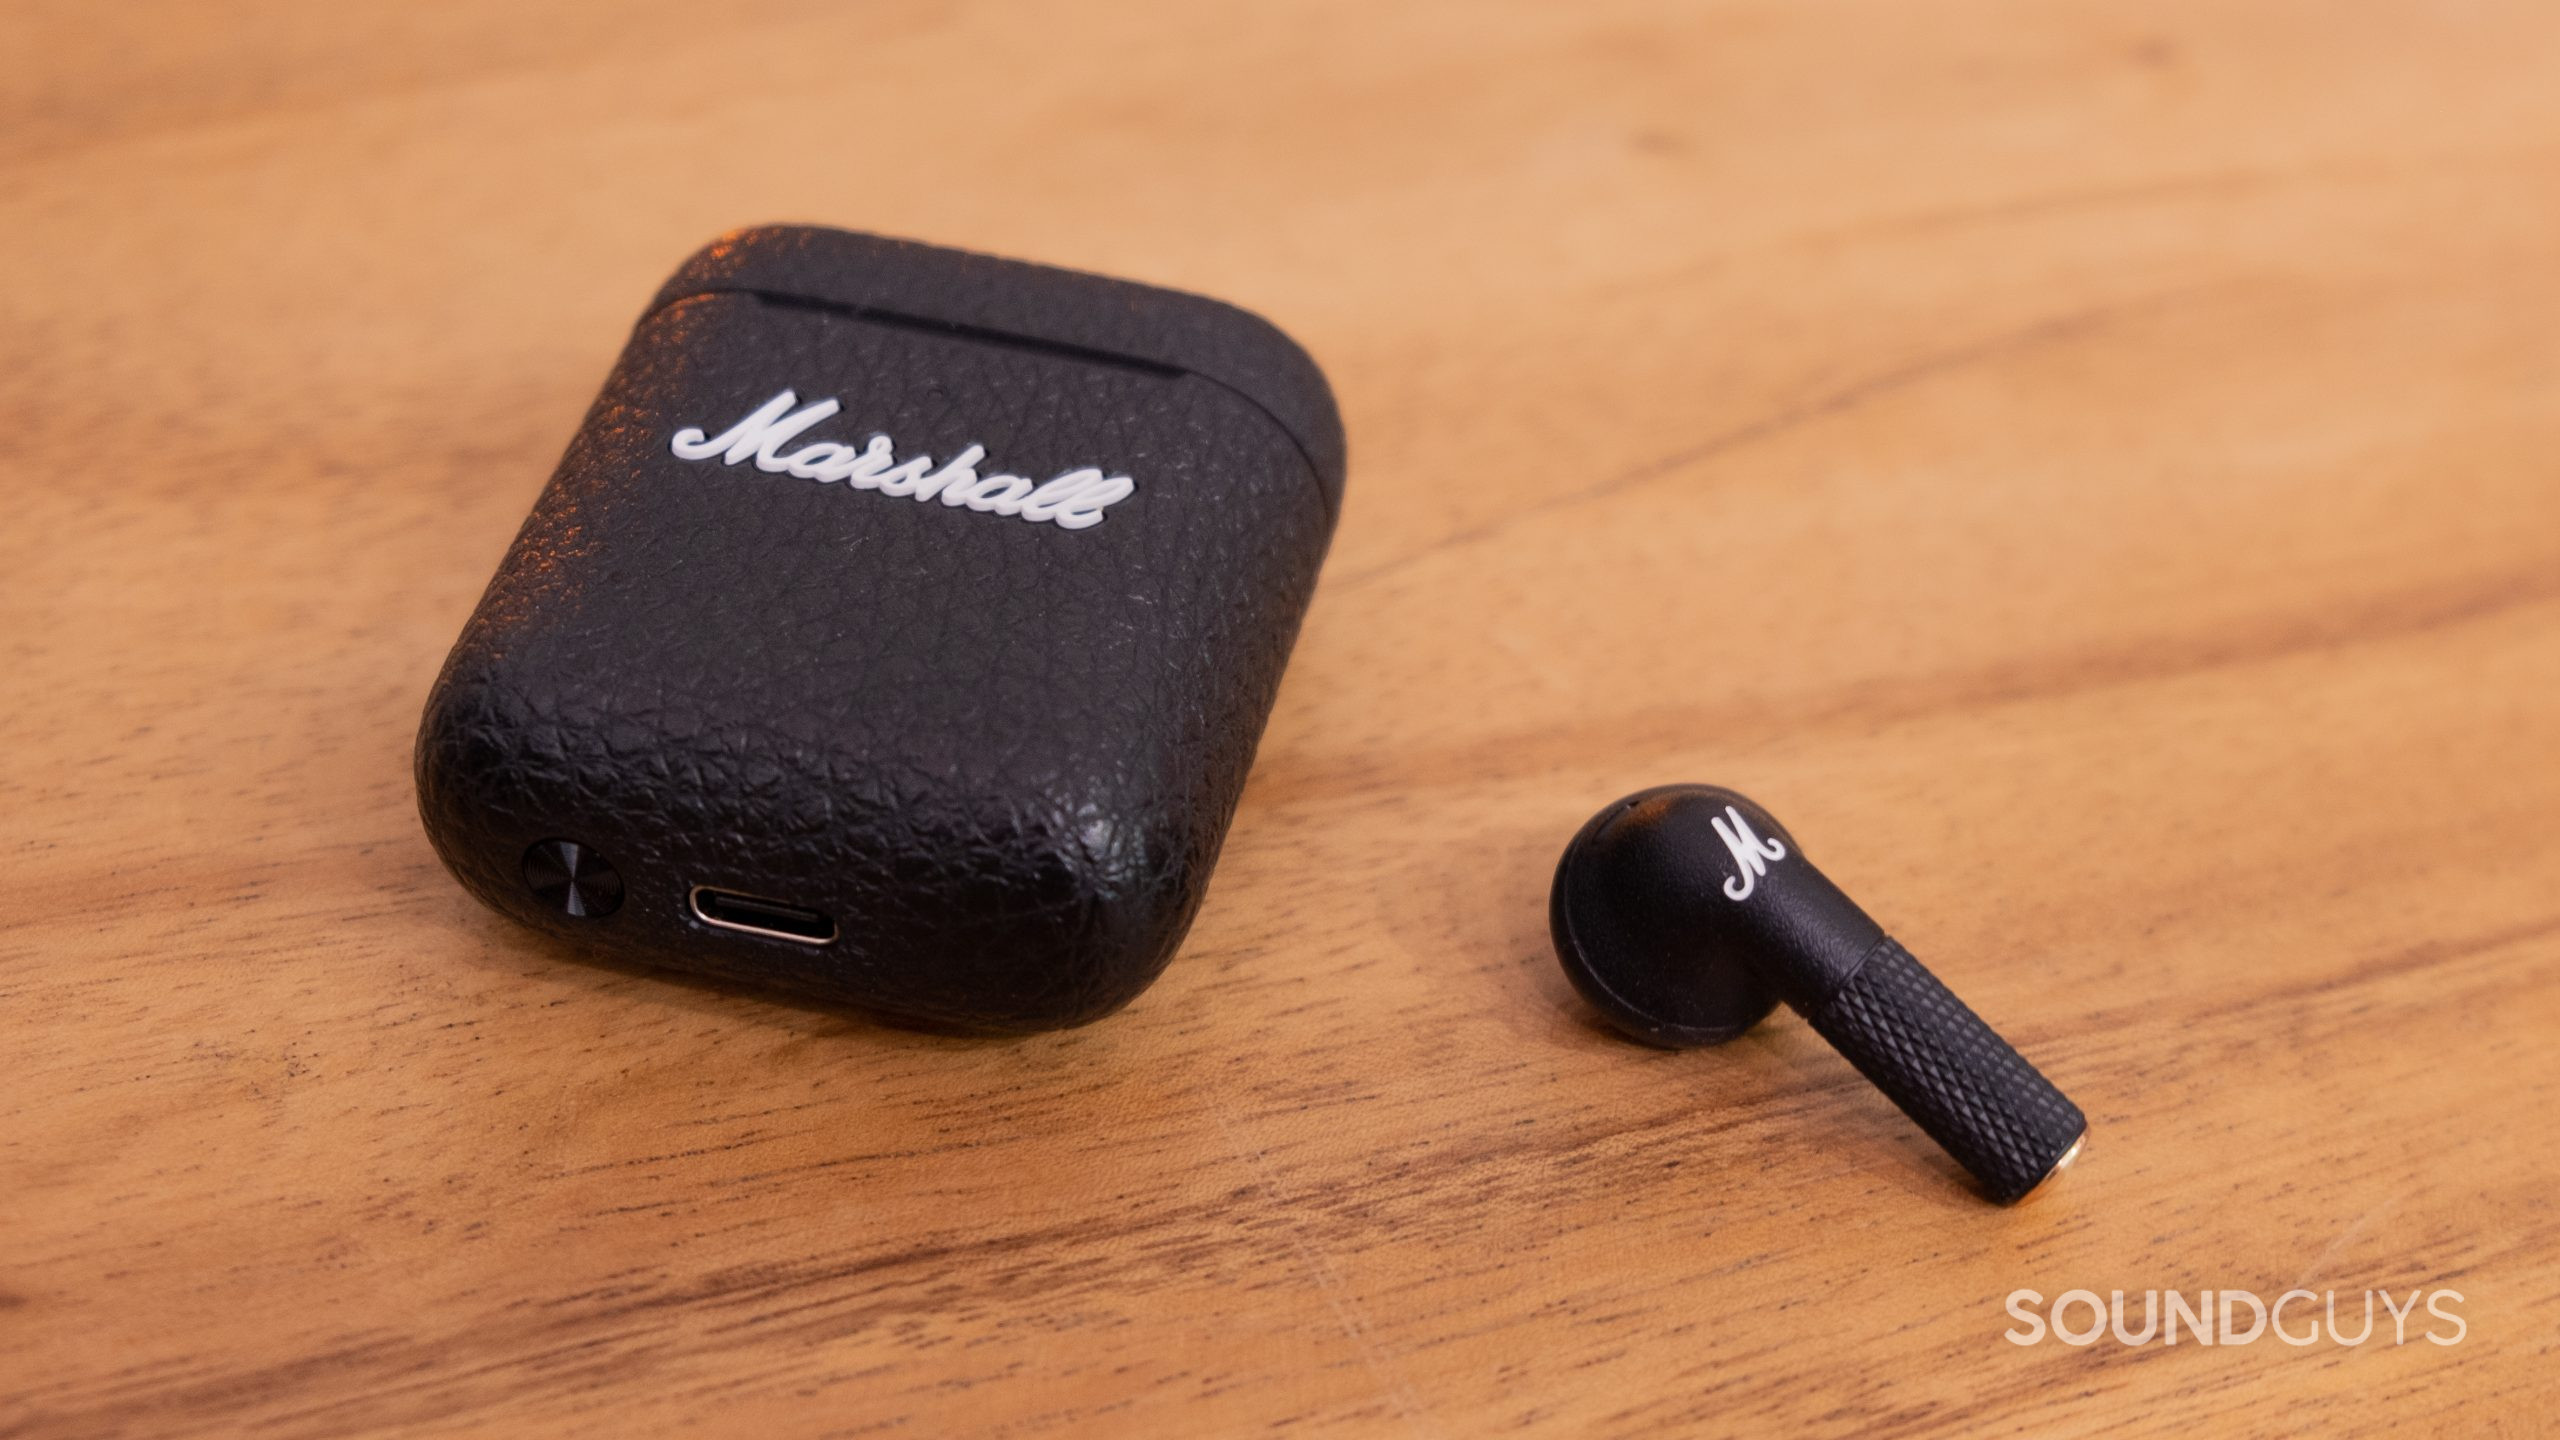 On a wood surface a single bud and the closed case of the Marshall Minor III.